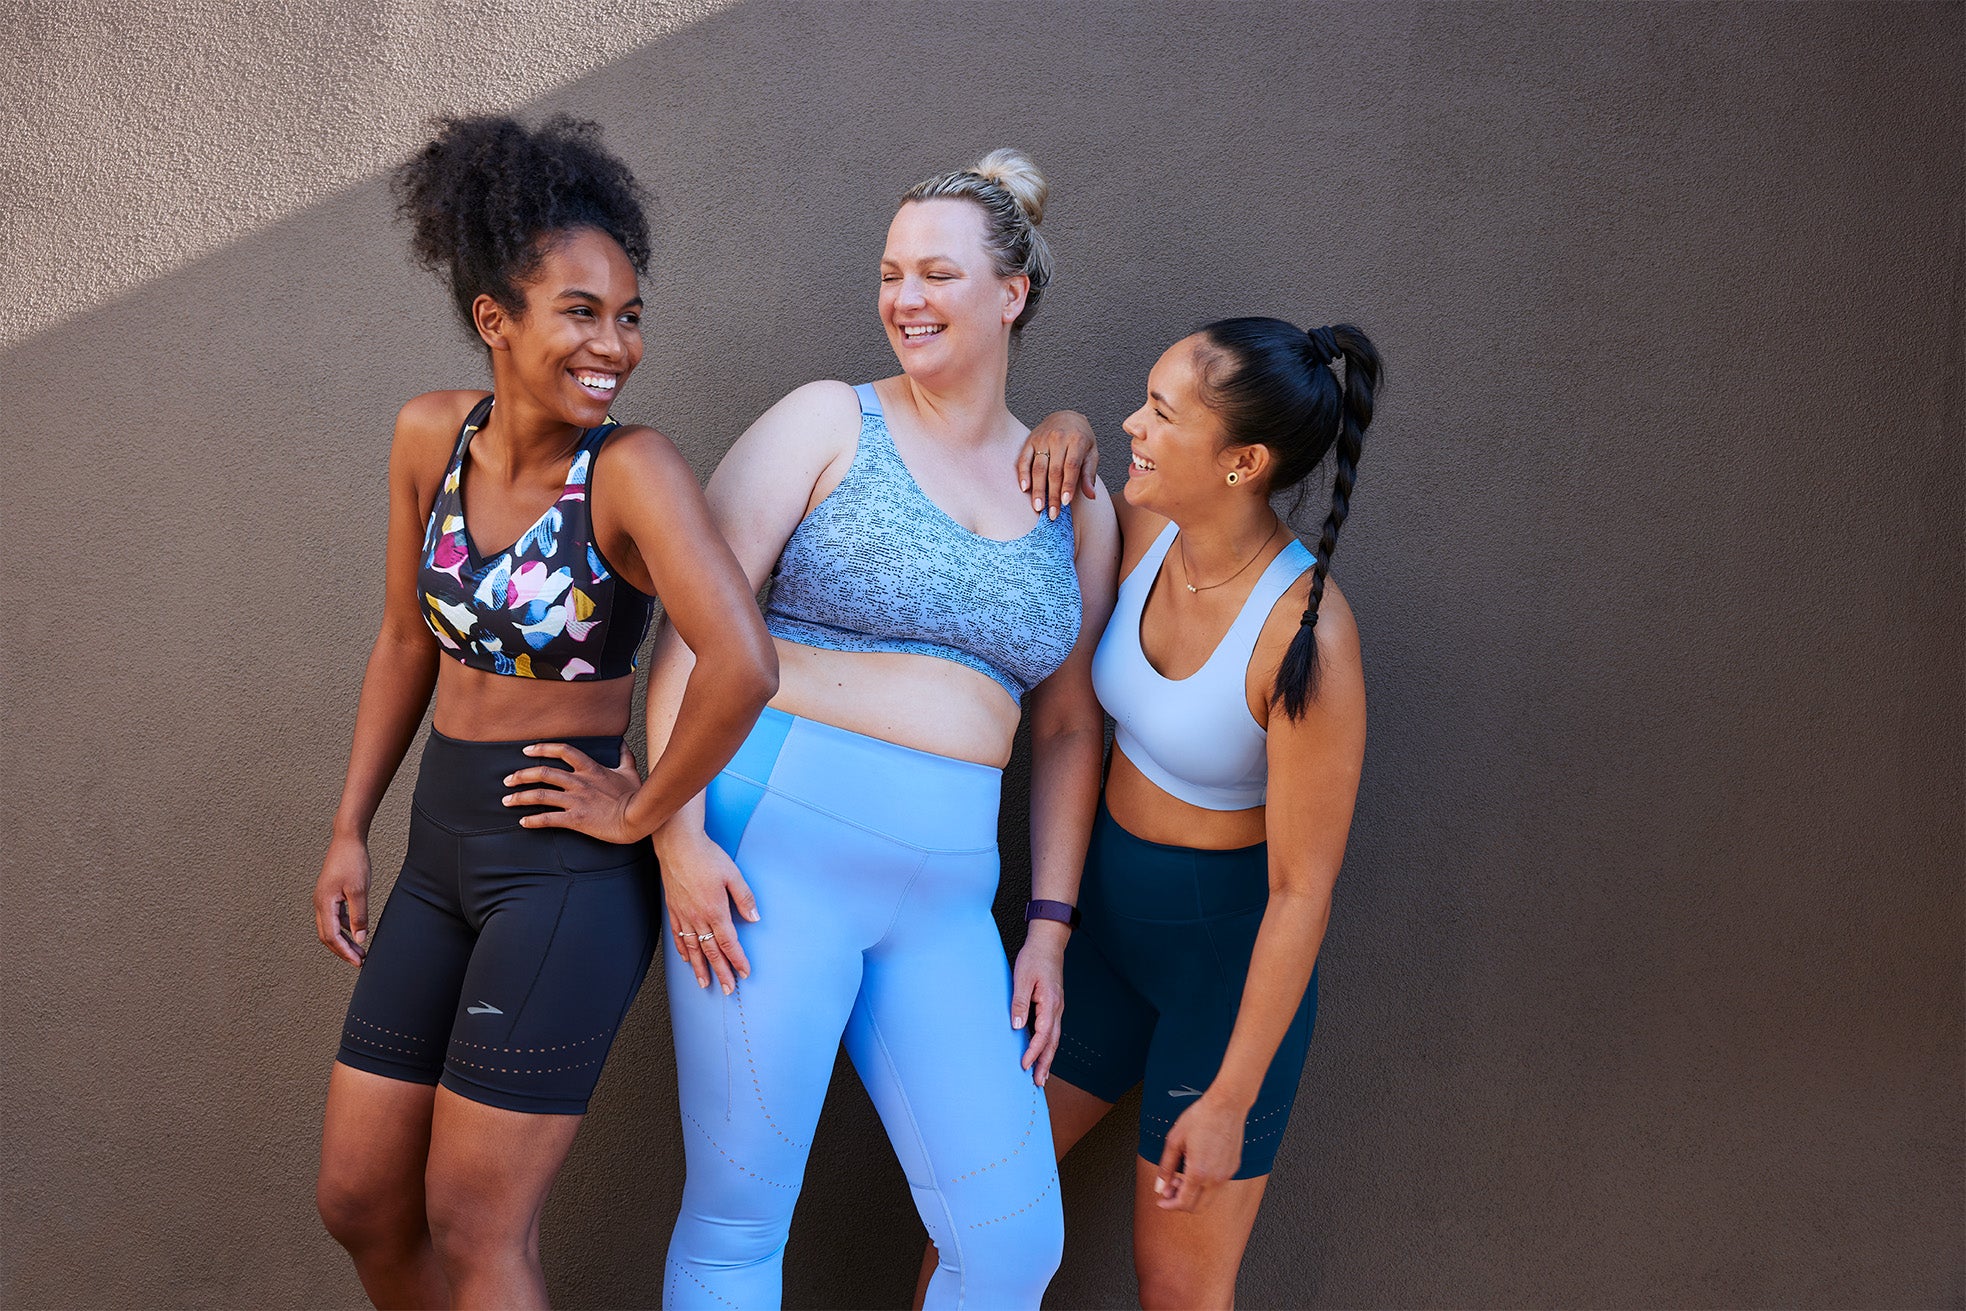 picture of womens in sports bras and athletic bottoms smiling.